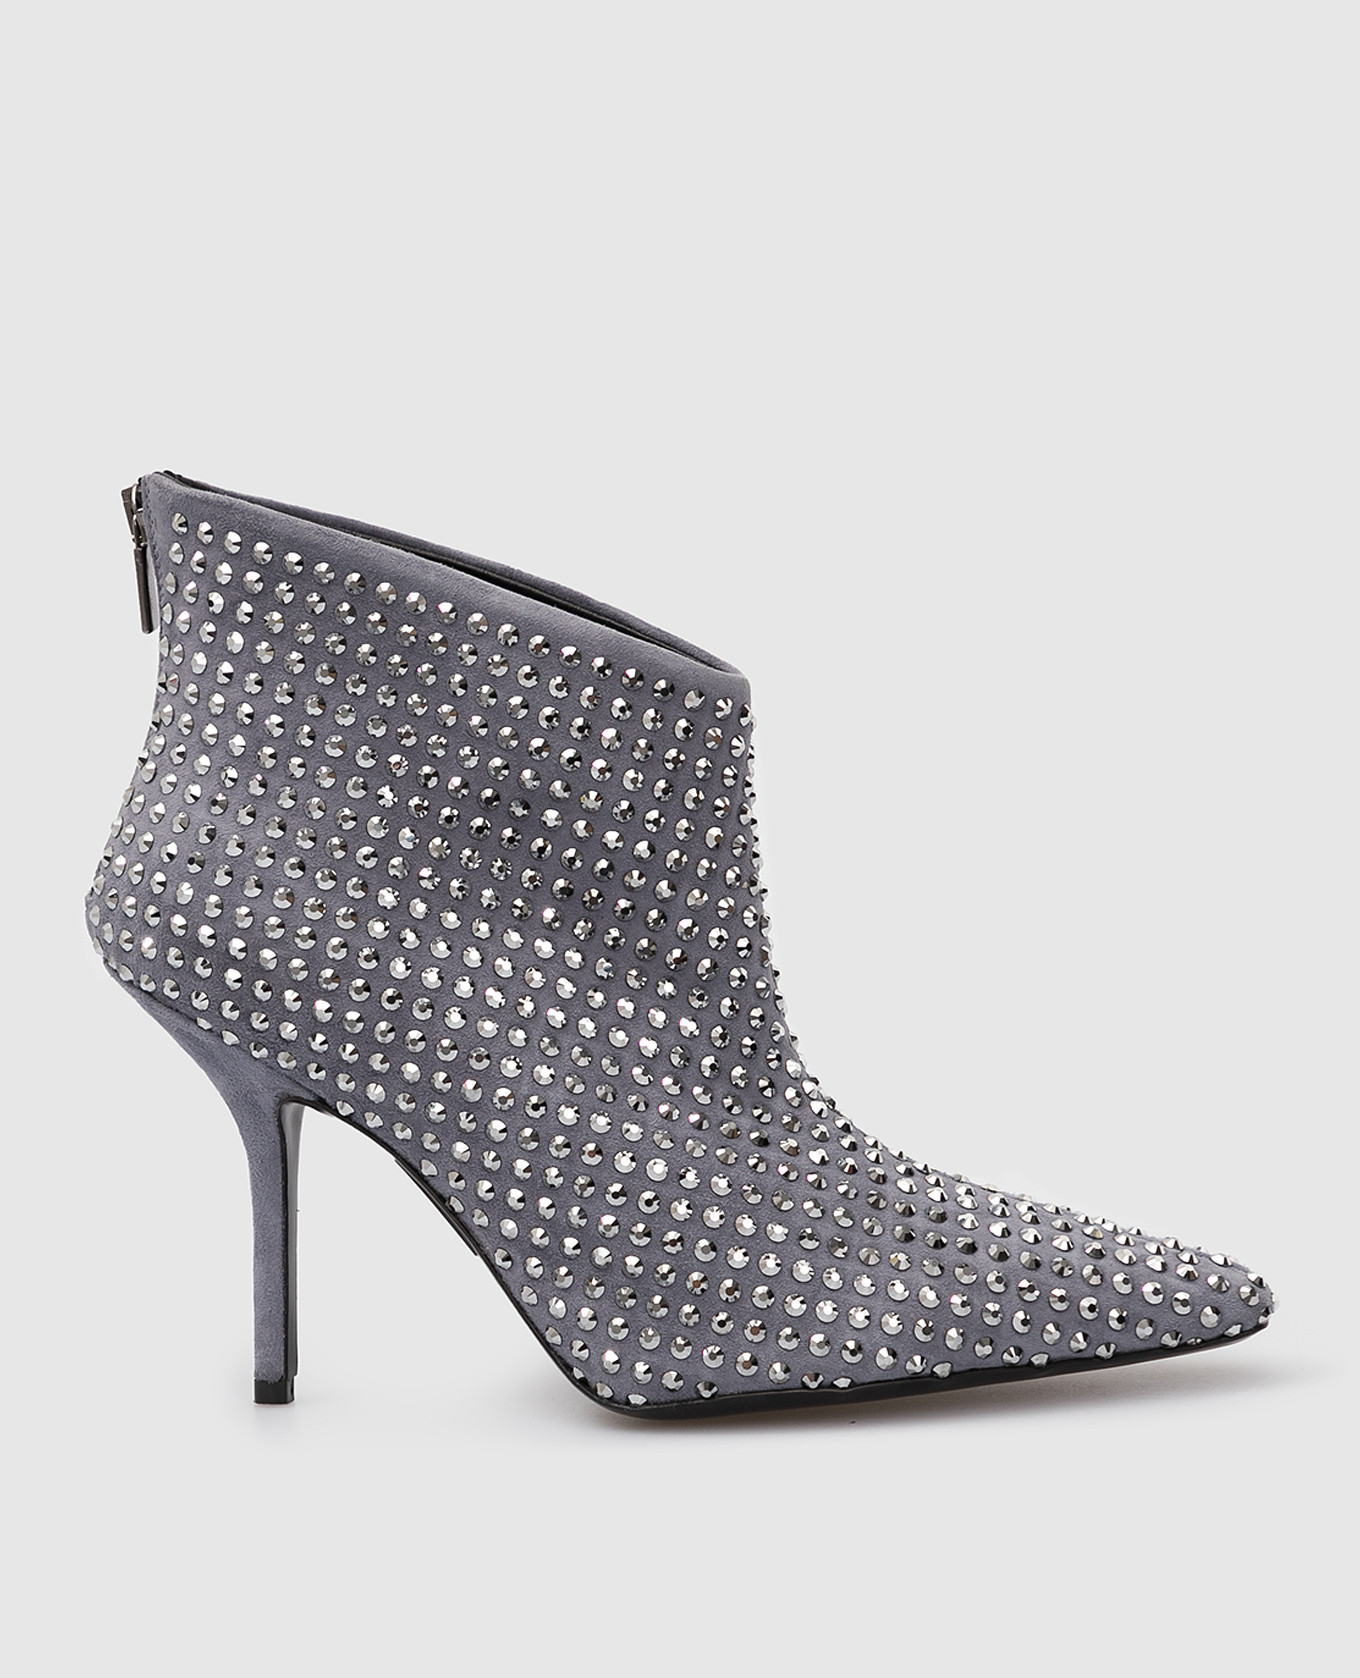 Gray suede ankle boots in Swarovski crystals